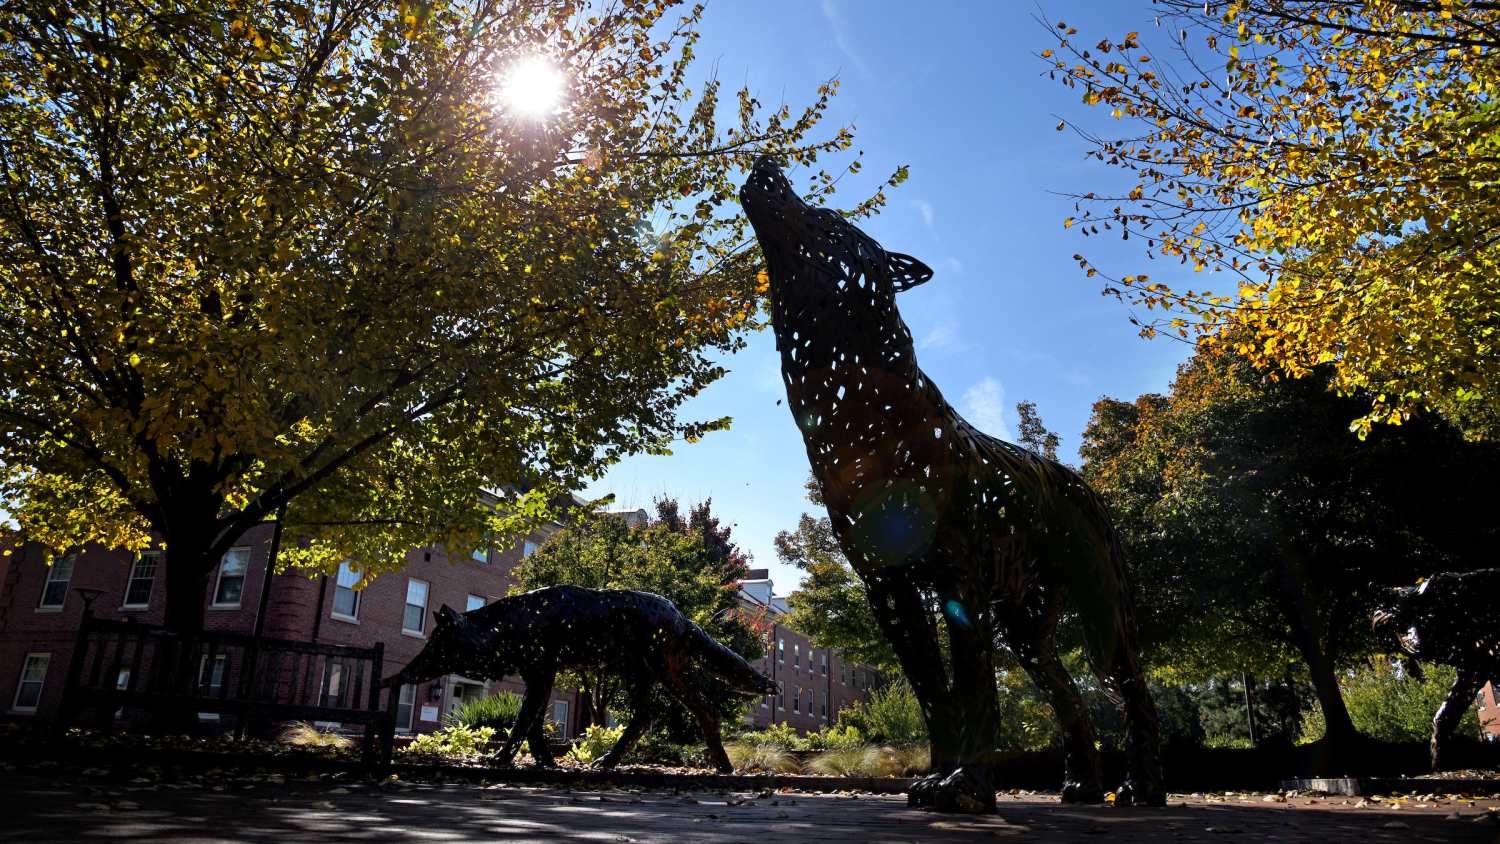 Howling wolf statues on campus